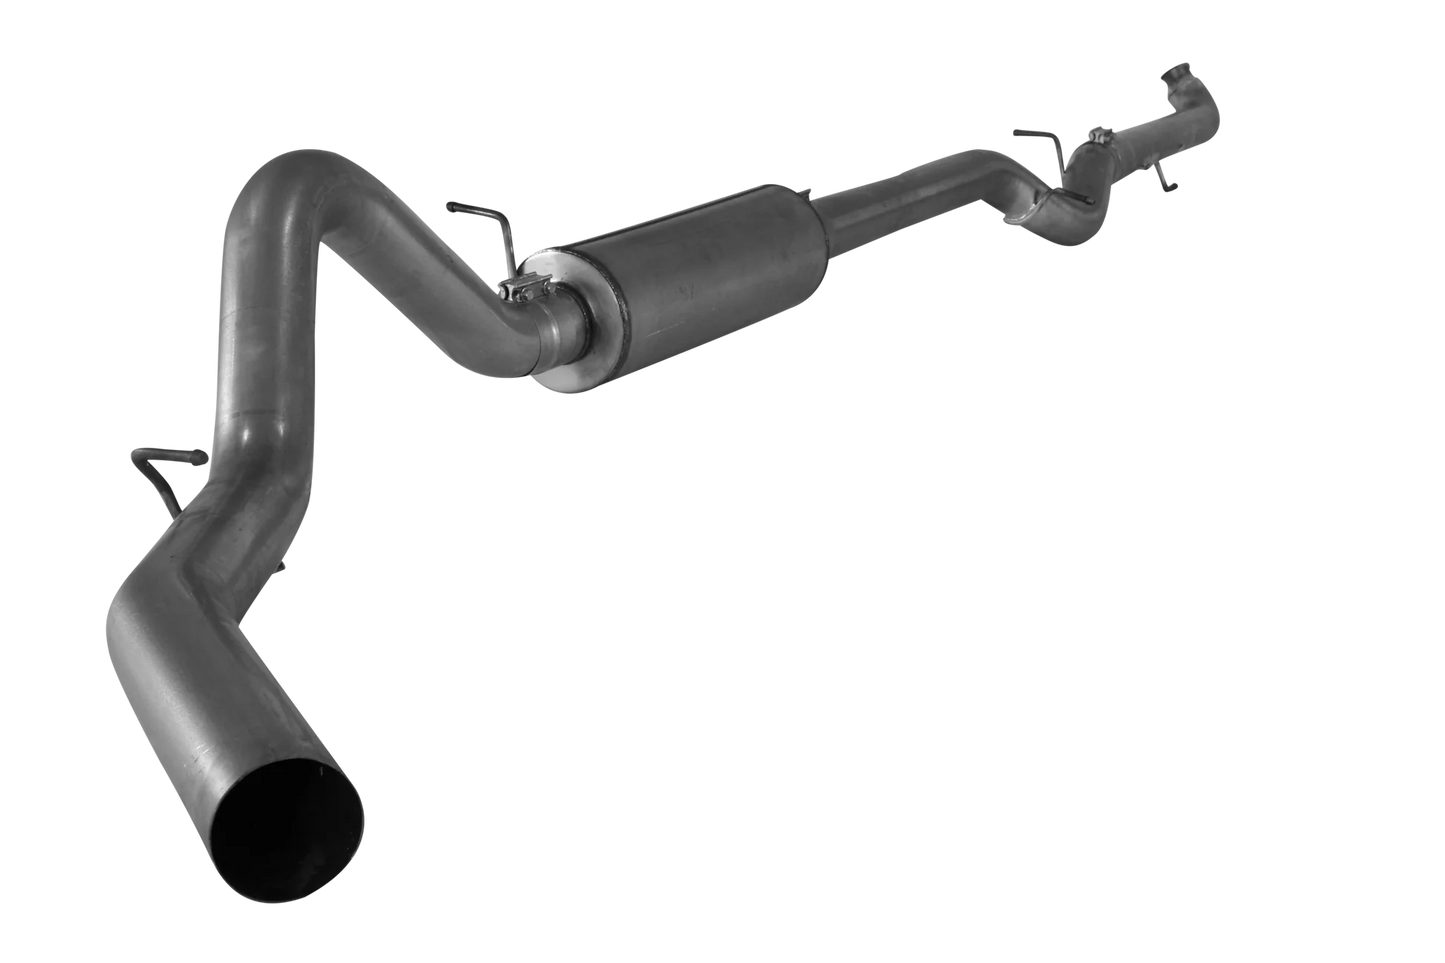 432112 432107 431112 431107 Mel's Manufacturing 4" Downpipe Back Single | 2001-2007 GM 2500/3500 6.6L DURAMAX  Mels Mfg FloPro Flo-Pro Flo Pro Hell On Wheels Performance Ltd Limited Canadian Owned and Operated Online Diesel Parts Distribution & Wholesale Supply Center in Alberta Canada Shipping Supplying to Alberta British Columbia Sask Saskatchewan Manitoba Ontario Quebec Newfoundland Labrador New Brunswick Nova Scotia Prince Edward Island AB BC SK MB ON QC PQ NS NB NFLD N.L. PEI